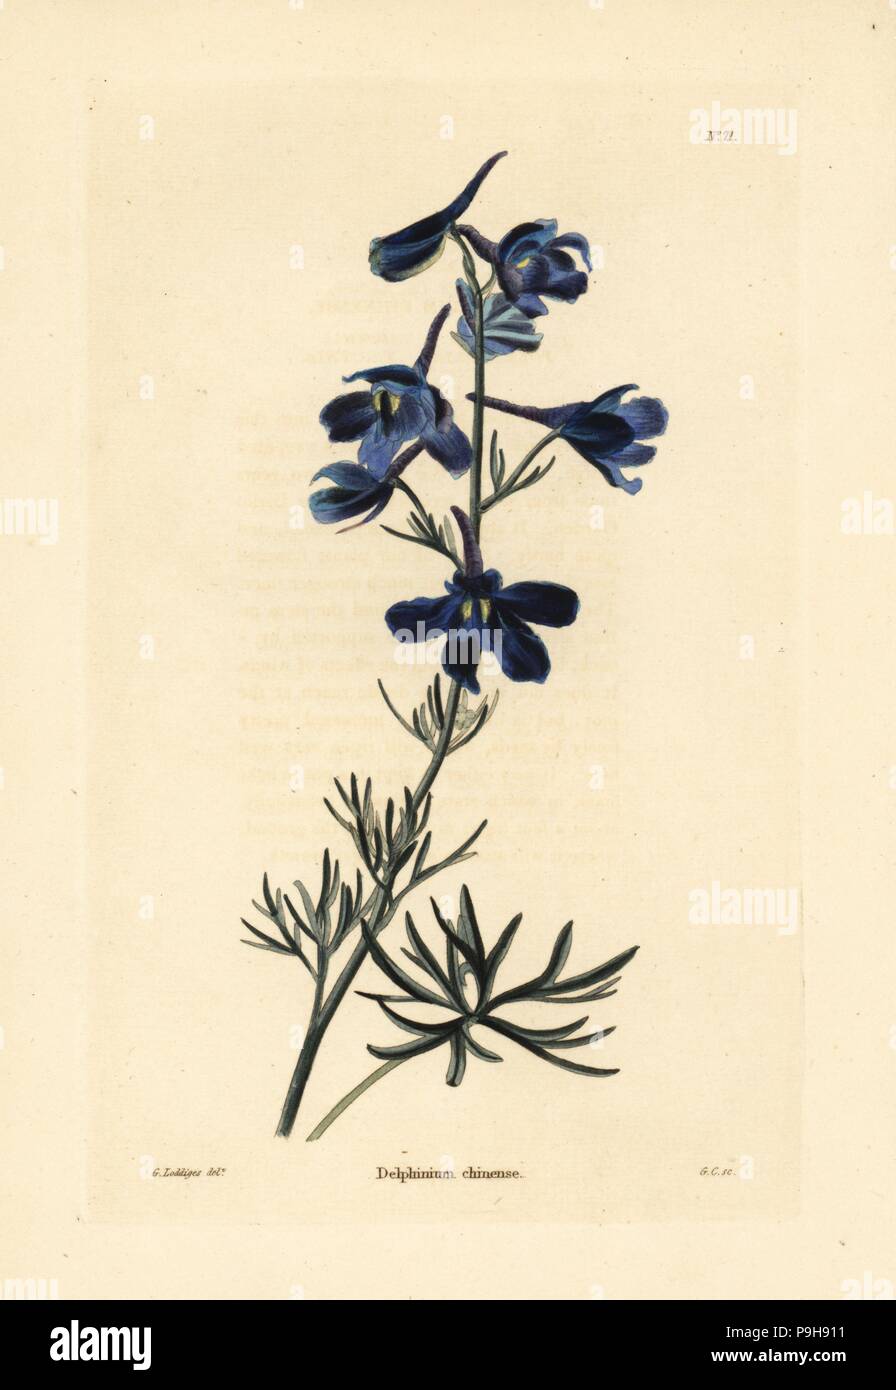 Siberian larkspur, Delphinium grandiflorum (Delphinium chinense). Handcoloured copperplate engraving by George Cooke after George Loddiges from Conrad Loddiges' Botanical Cabinet, Hackney, 1817. Stock Photo